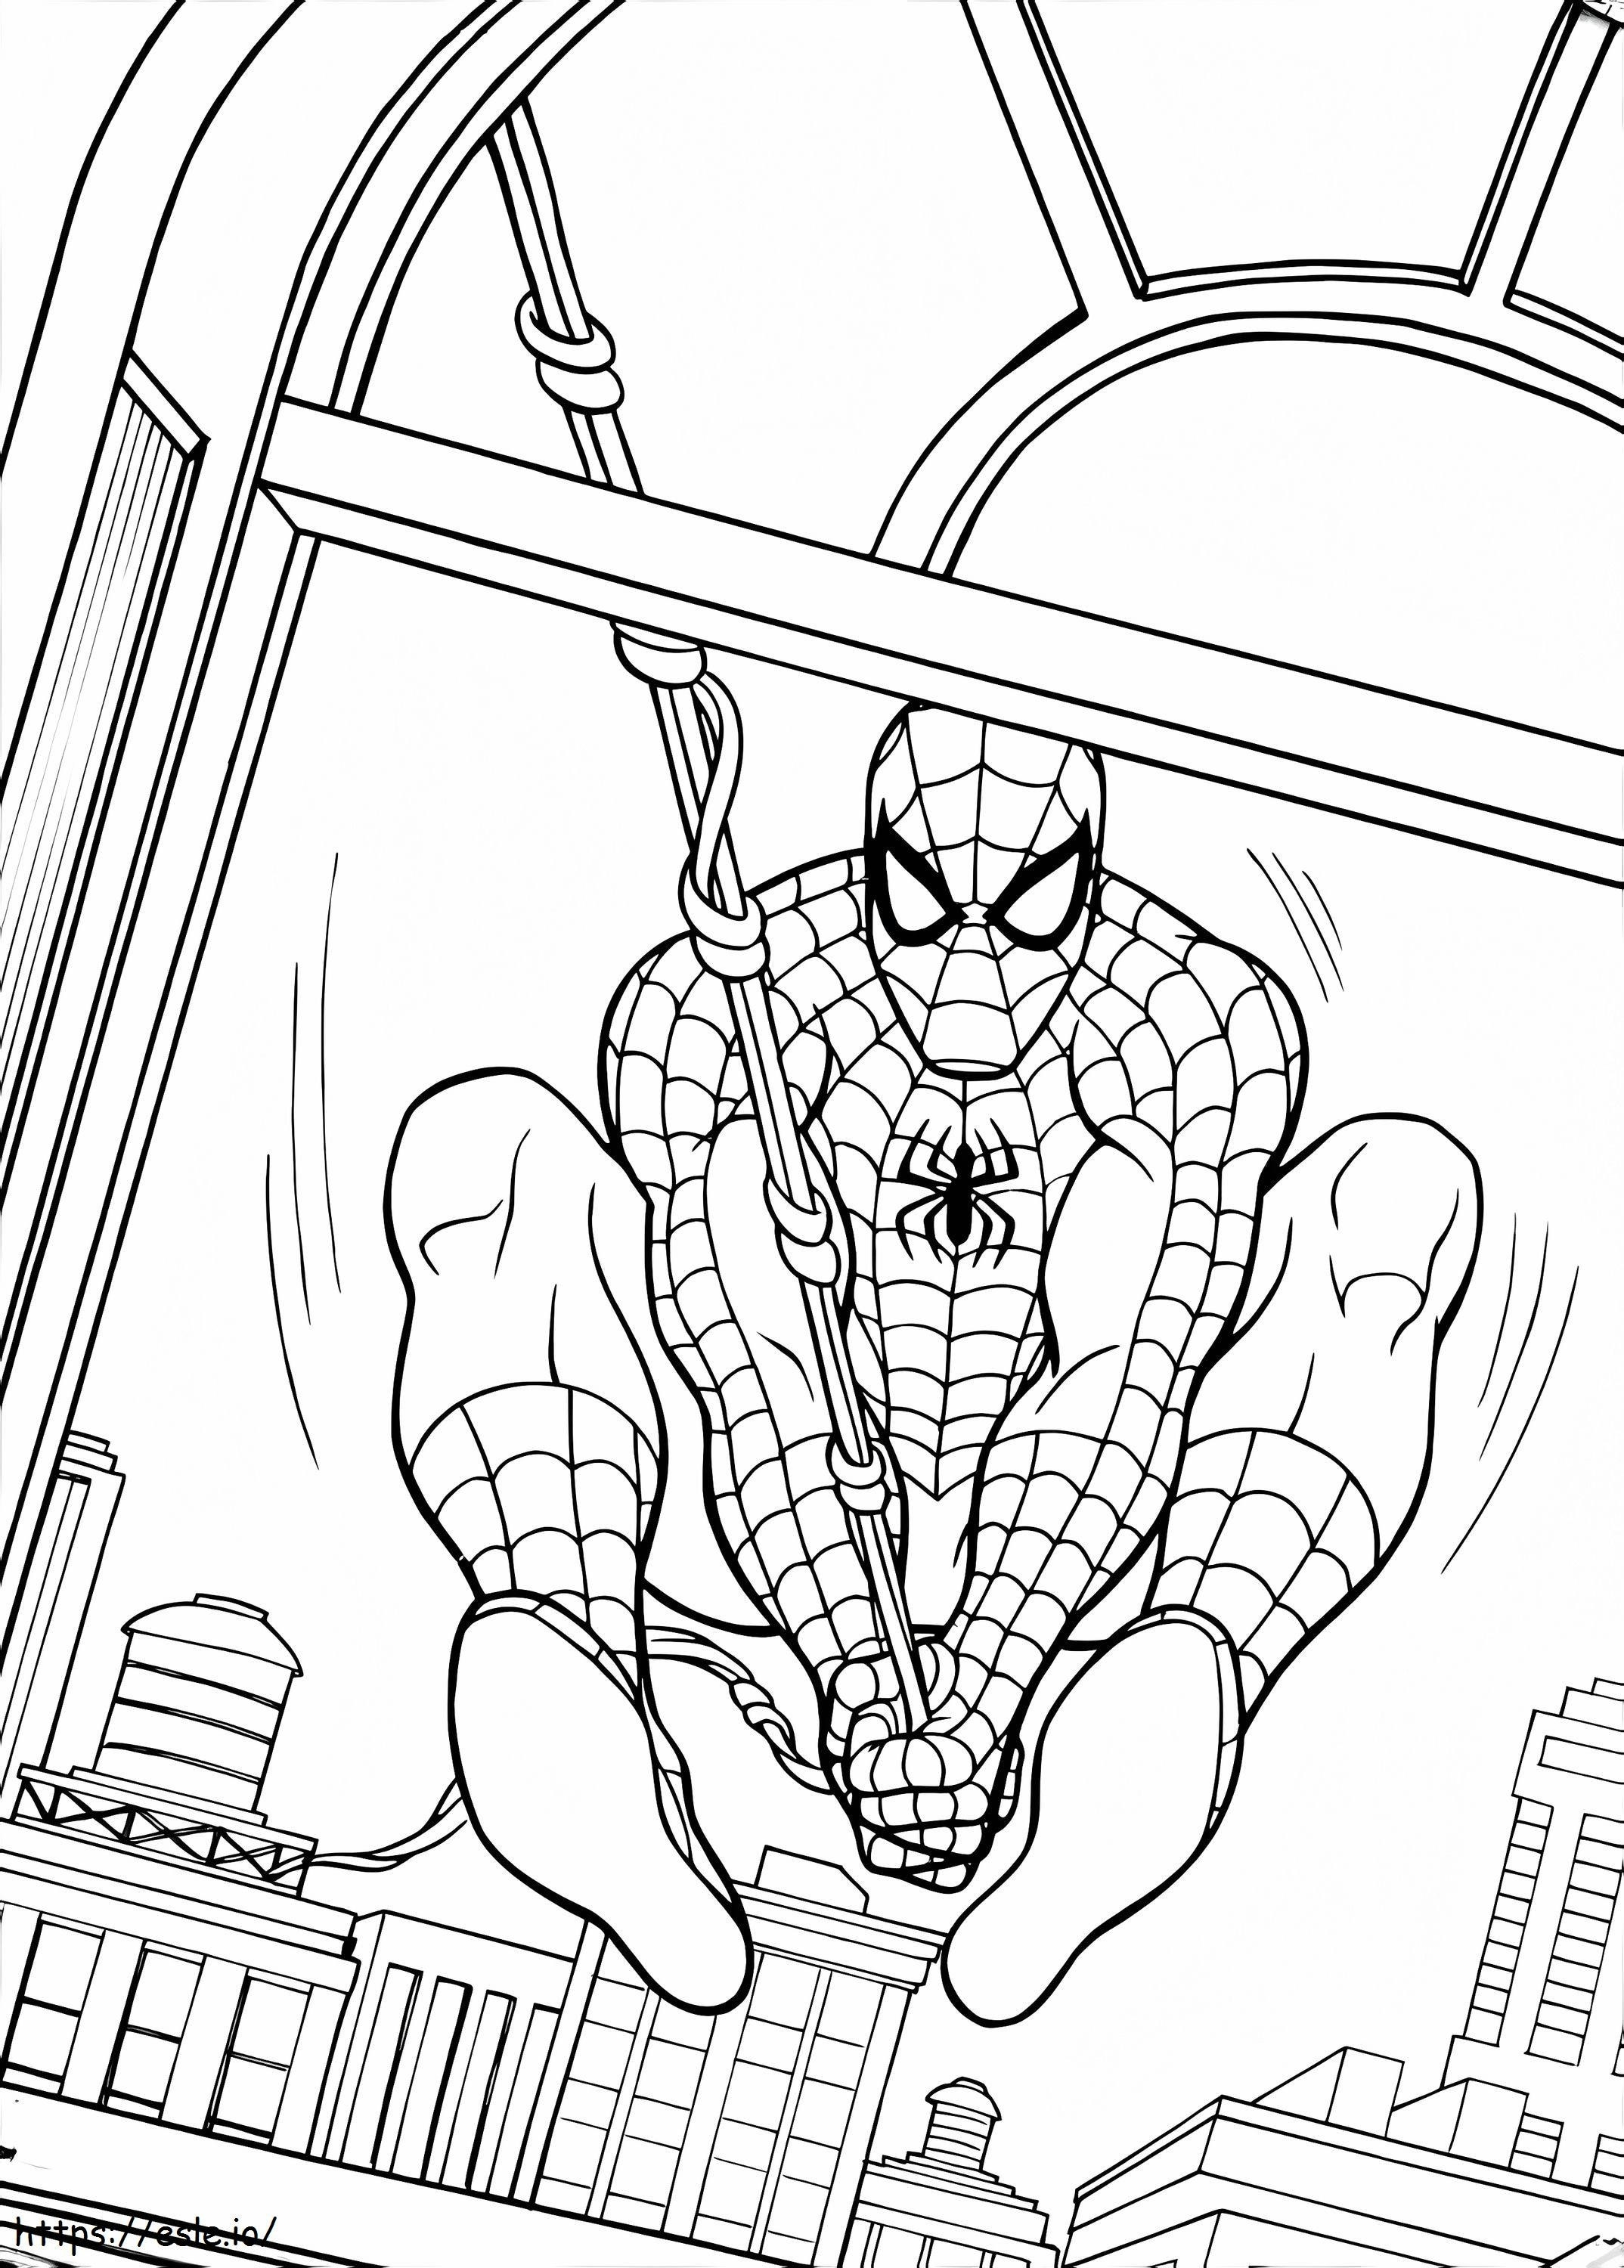 Spider Man In The City coloring page